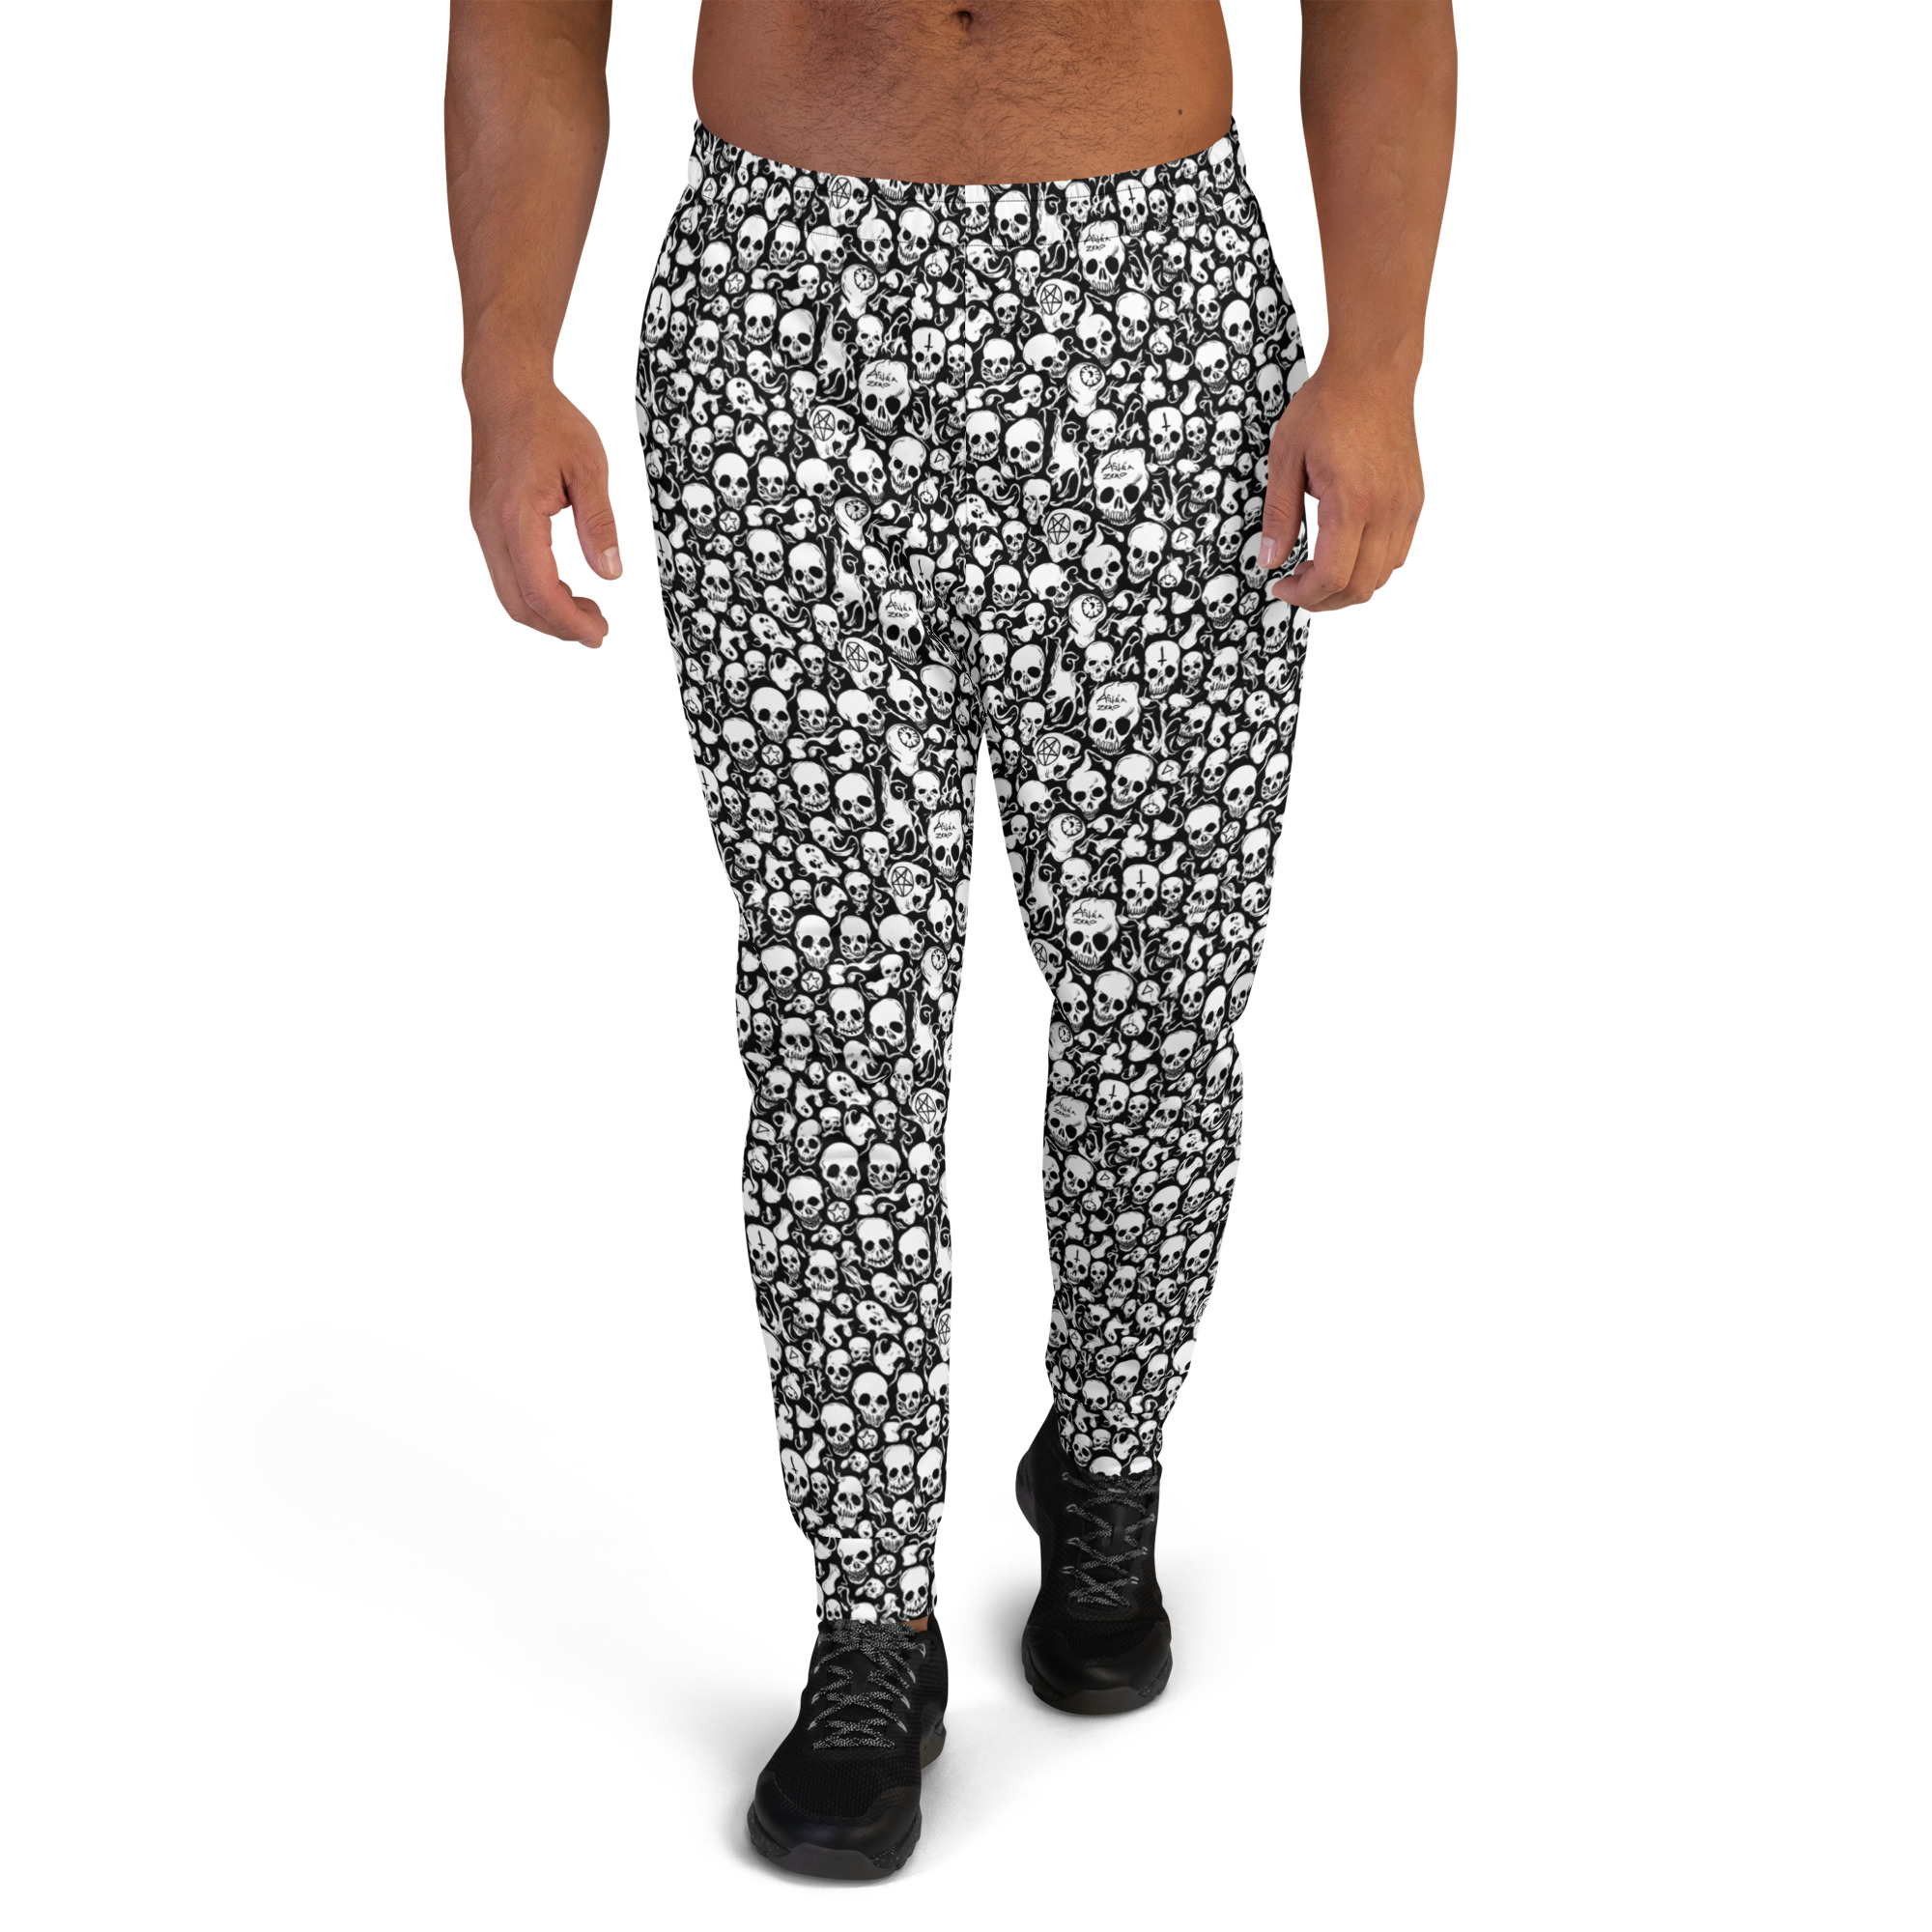 Featured image for “Abstract Skulls - Men's Joggers”